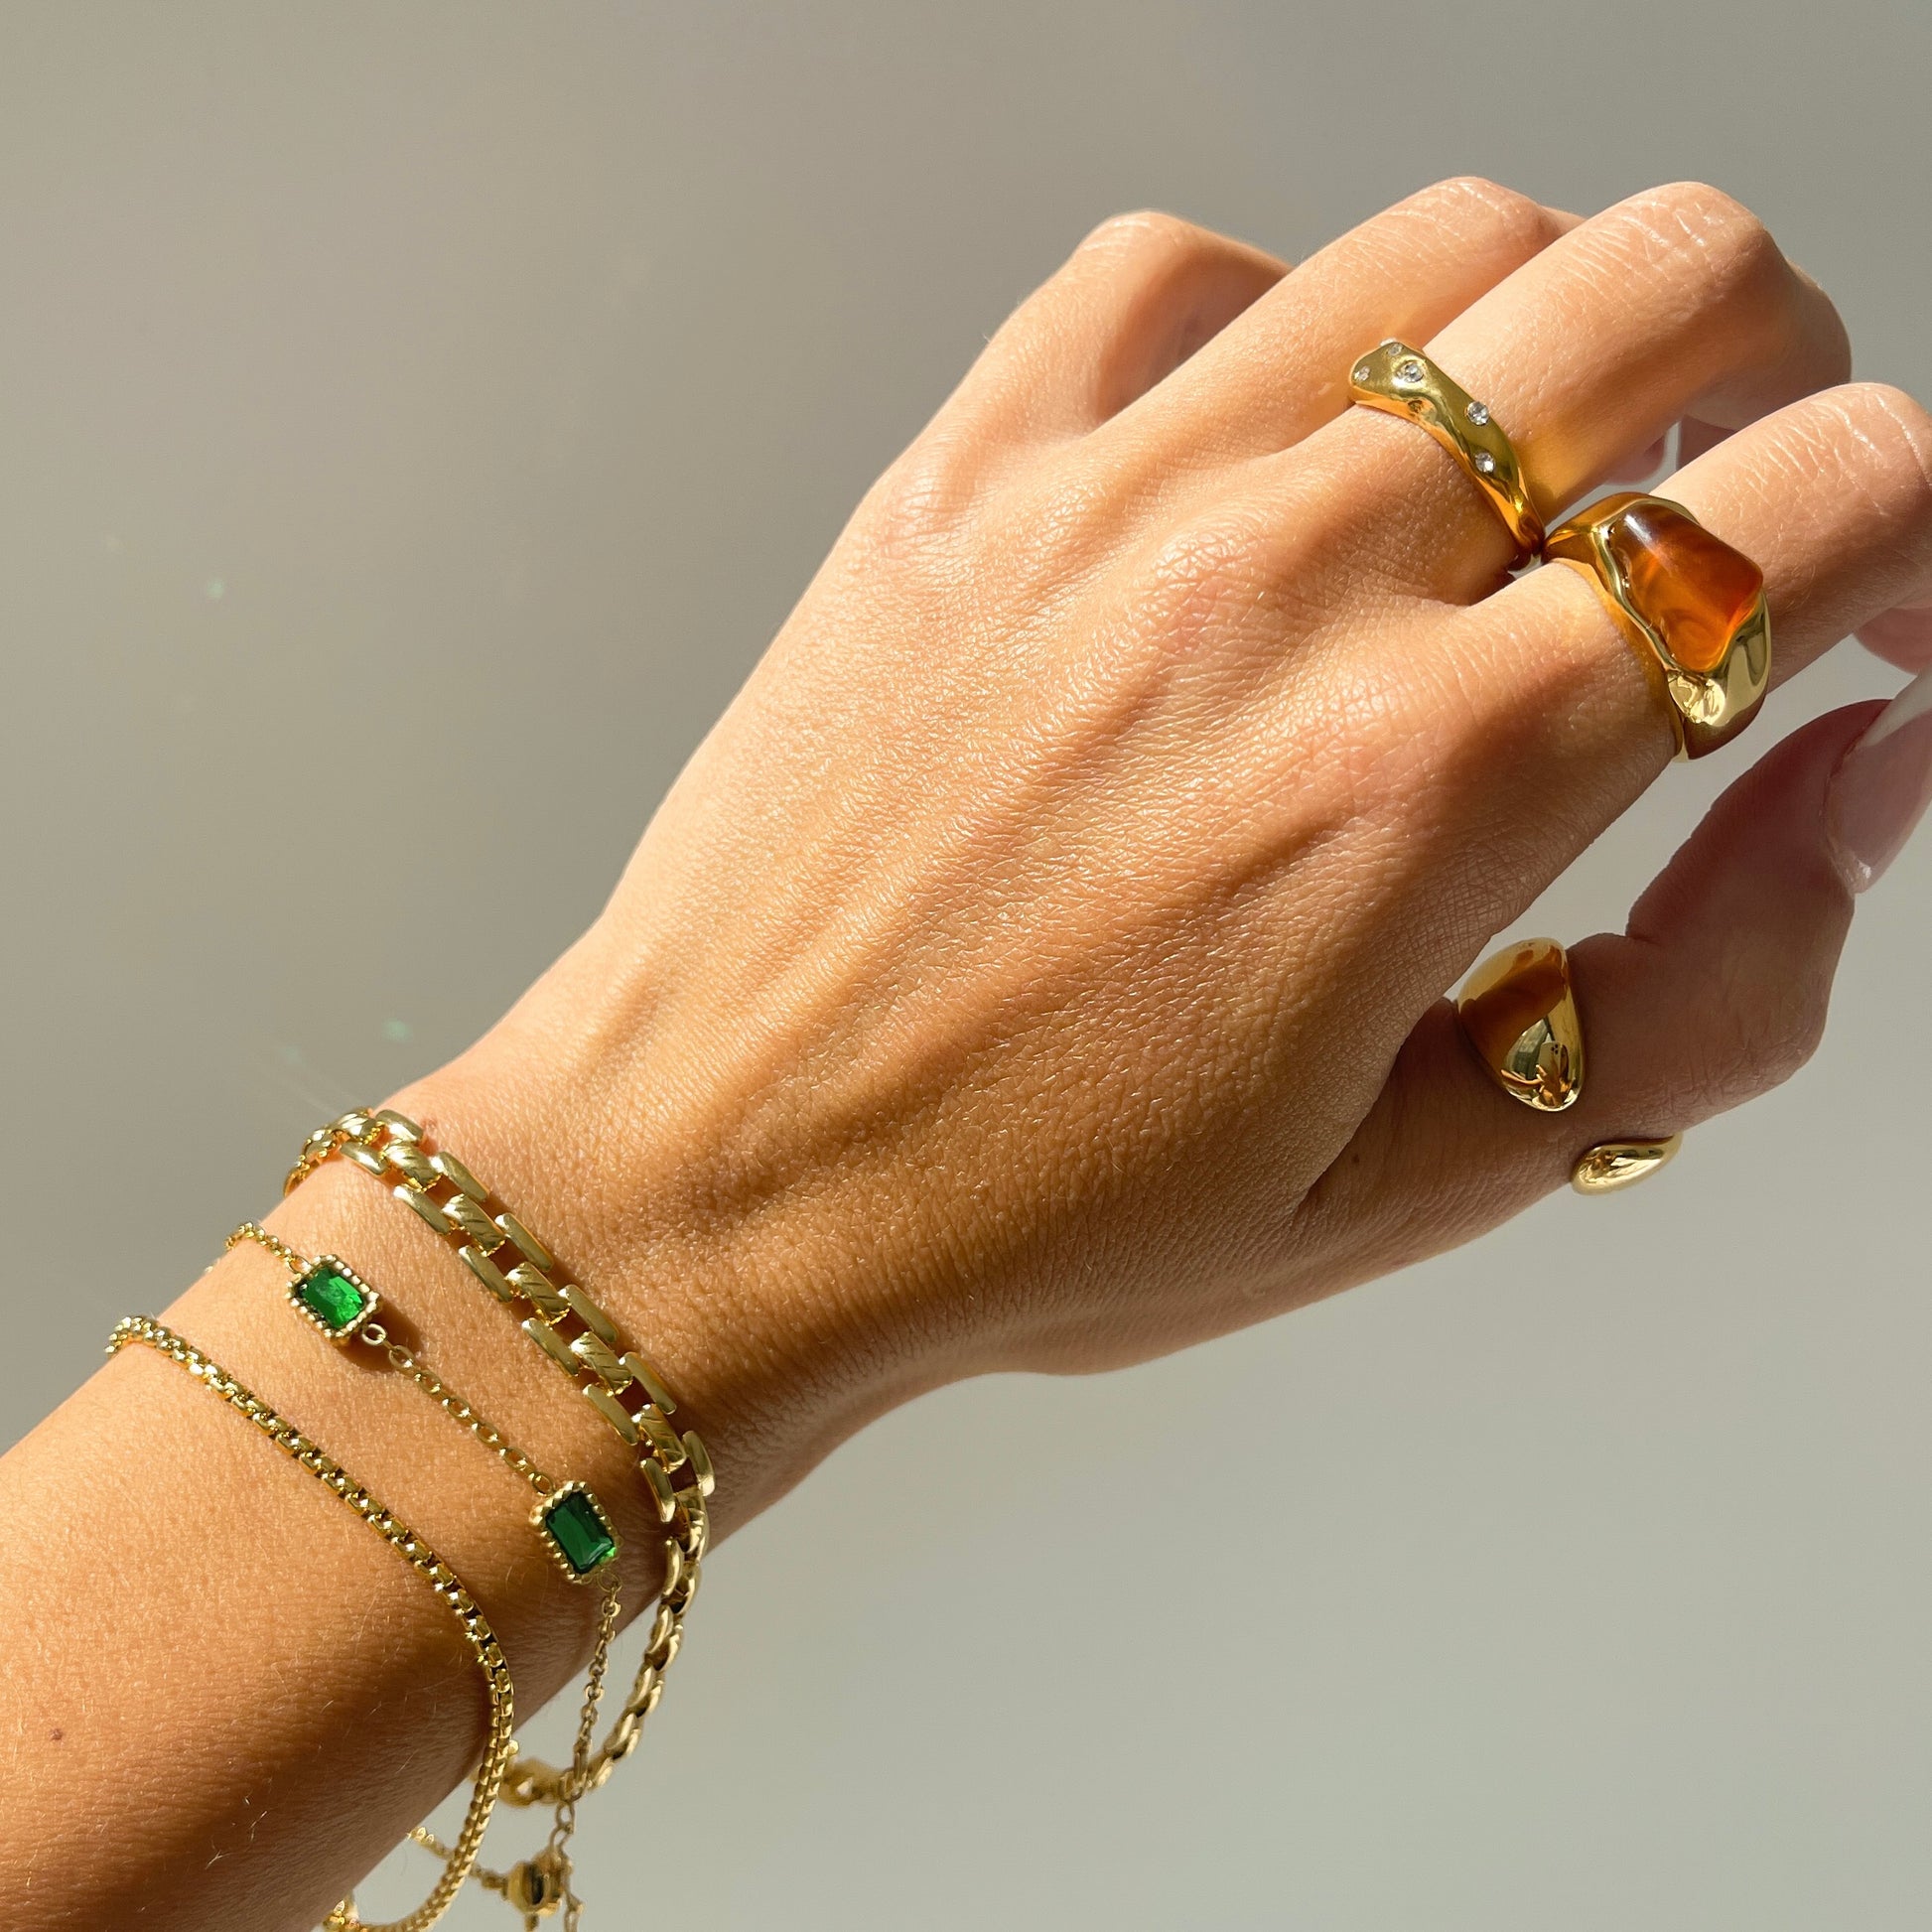 18k gold agate ring on hand with irregular stone ring and stacked gold bracelet chains